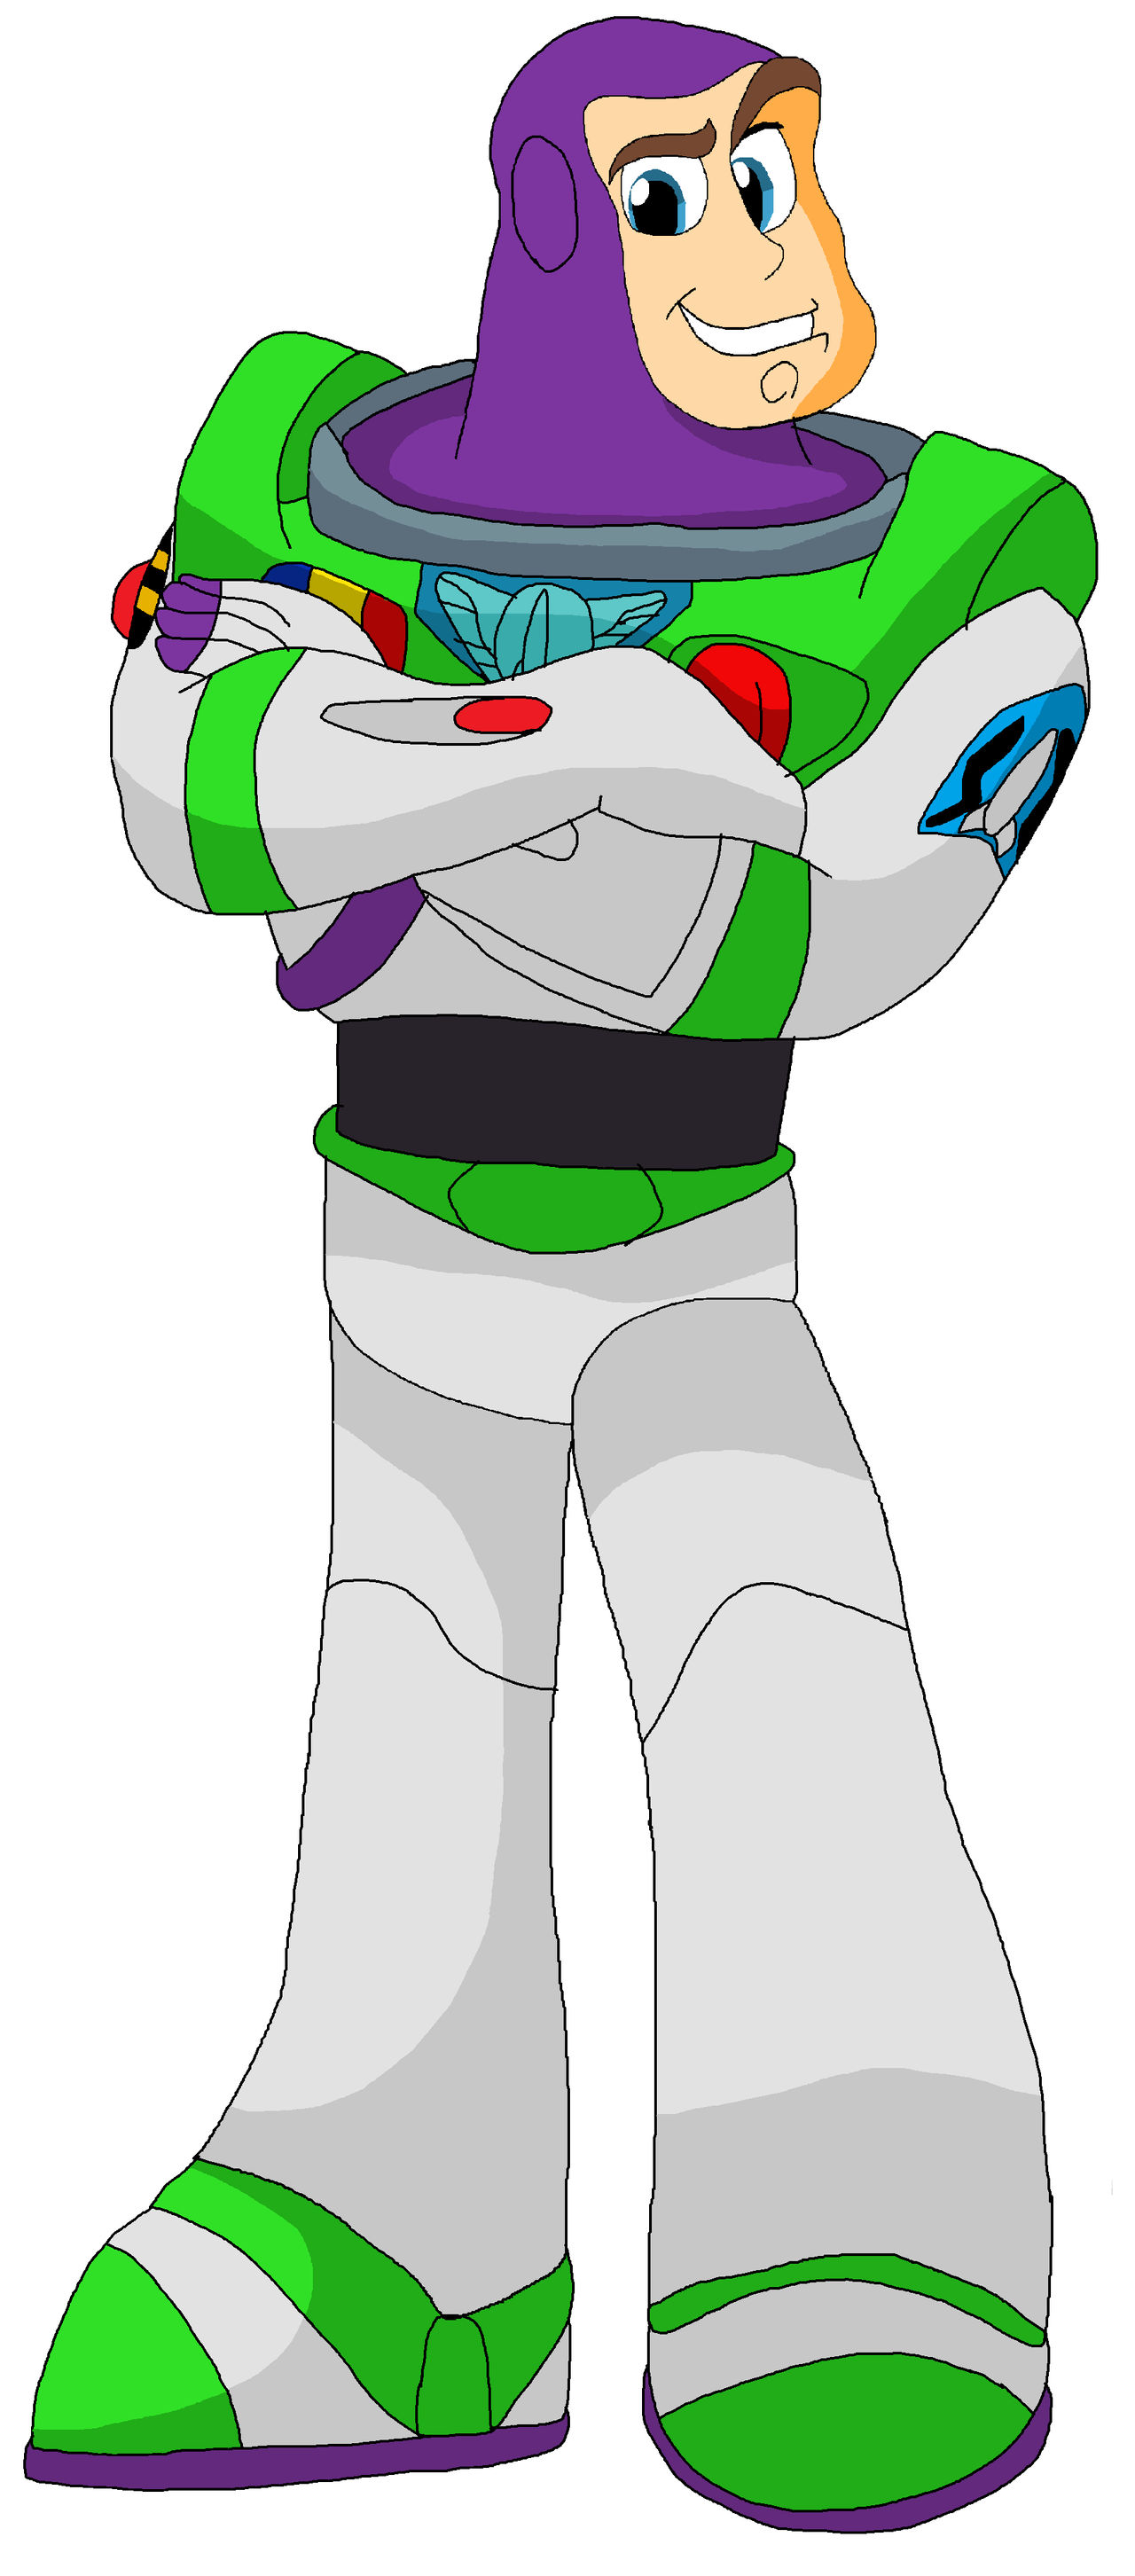 Drawing Of Buzz Lightyear () by JohnV2004 on DeviantArt